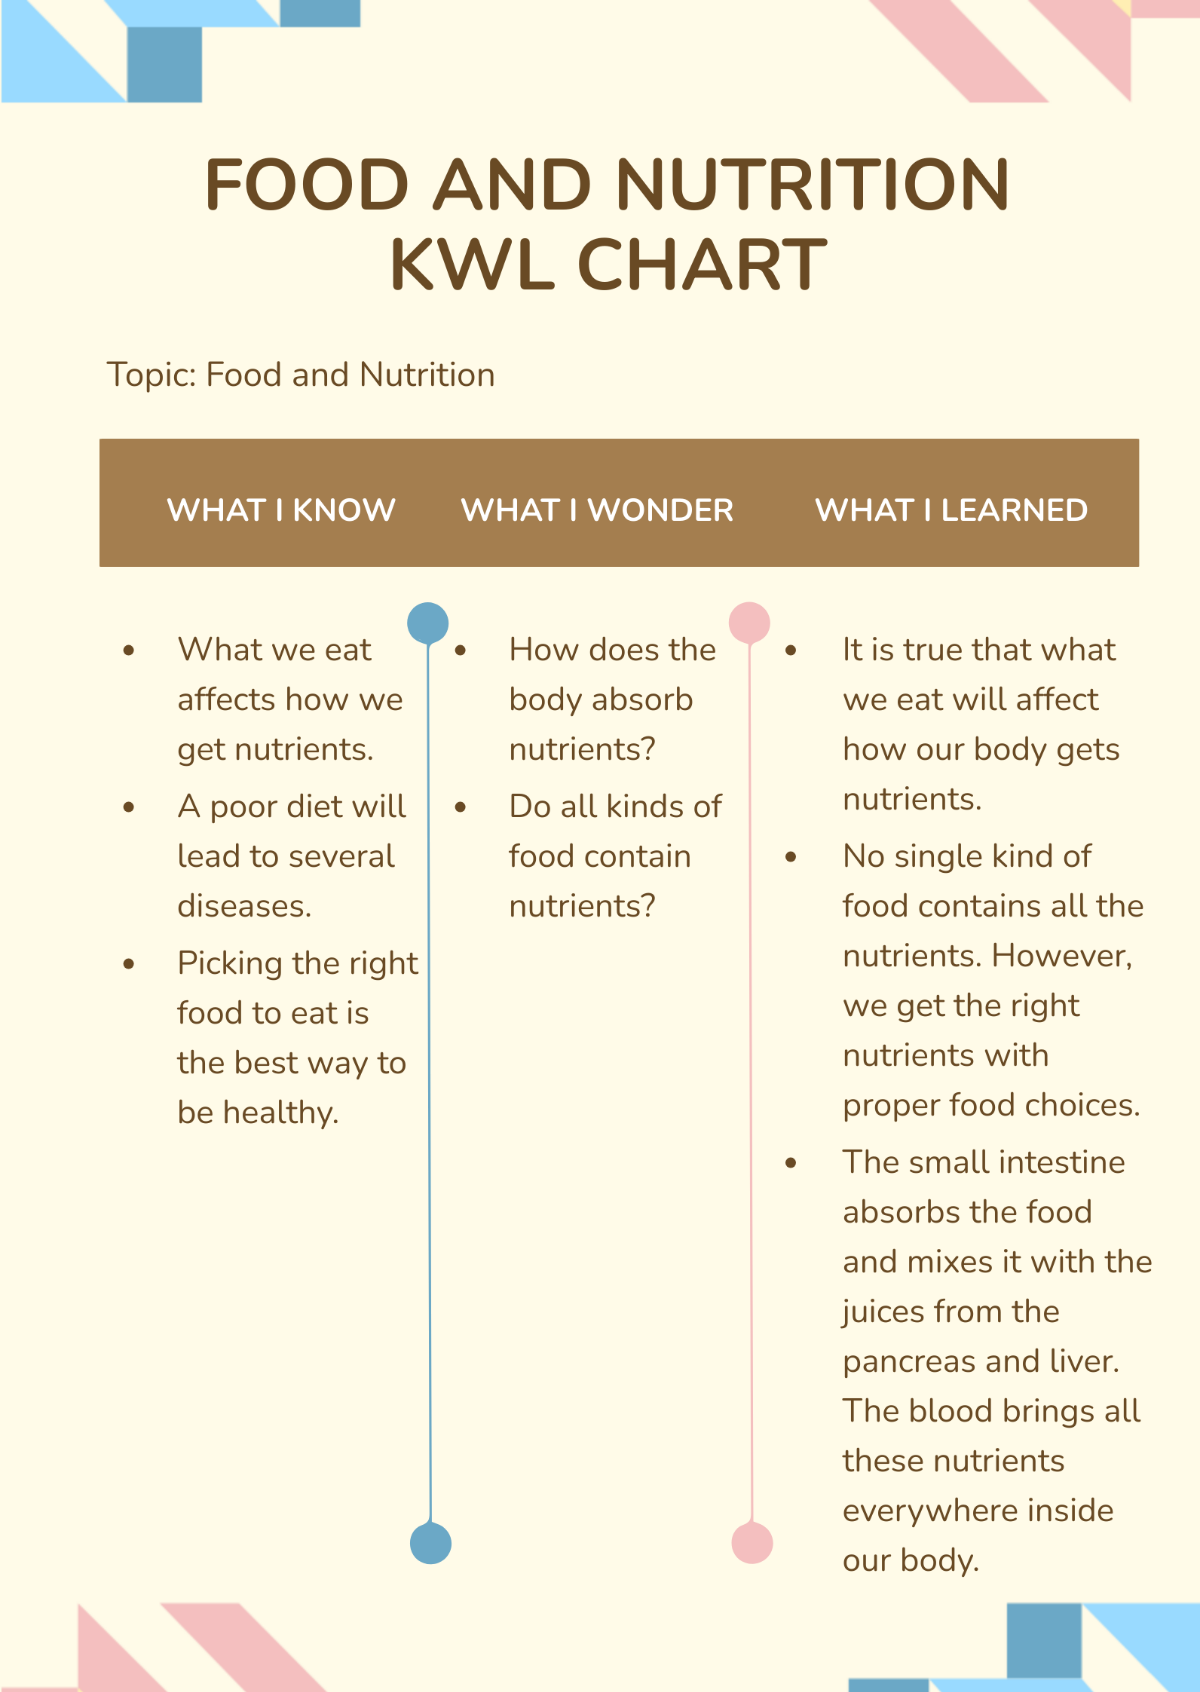 Food And Nutrition KWL Chart Template